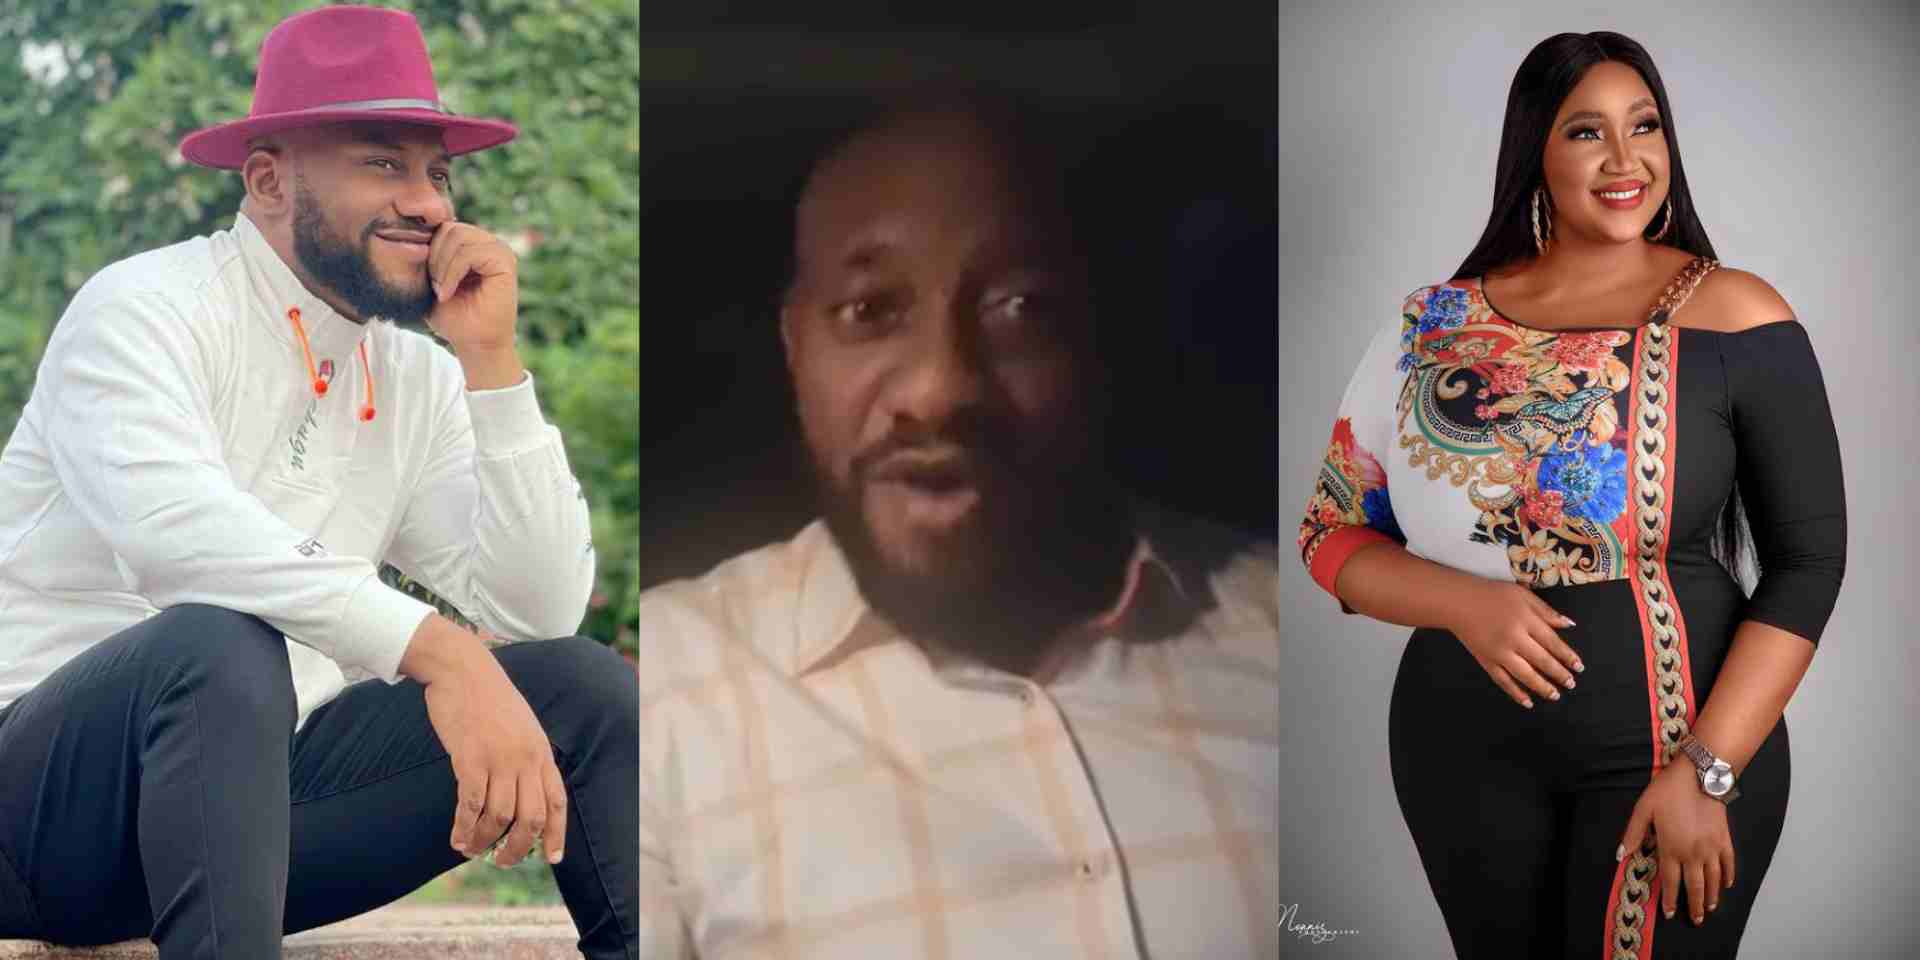 Why I married a second wife - Yul Edochie opens up in new video